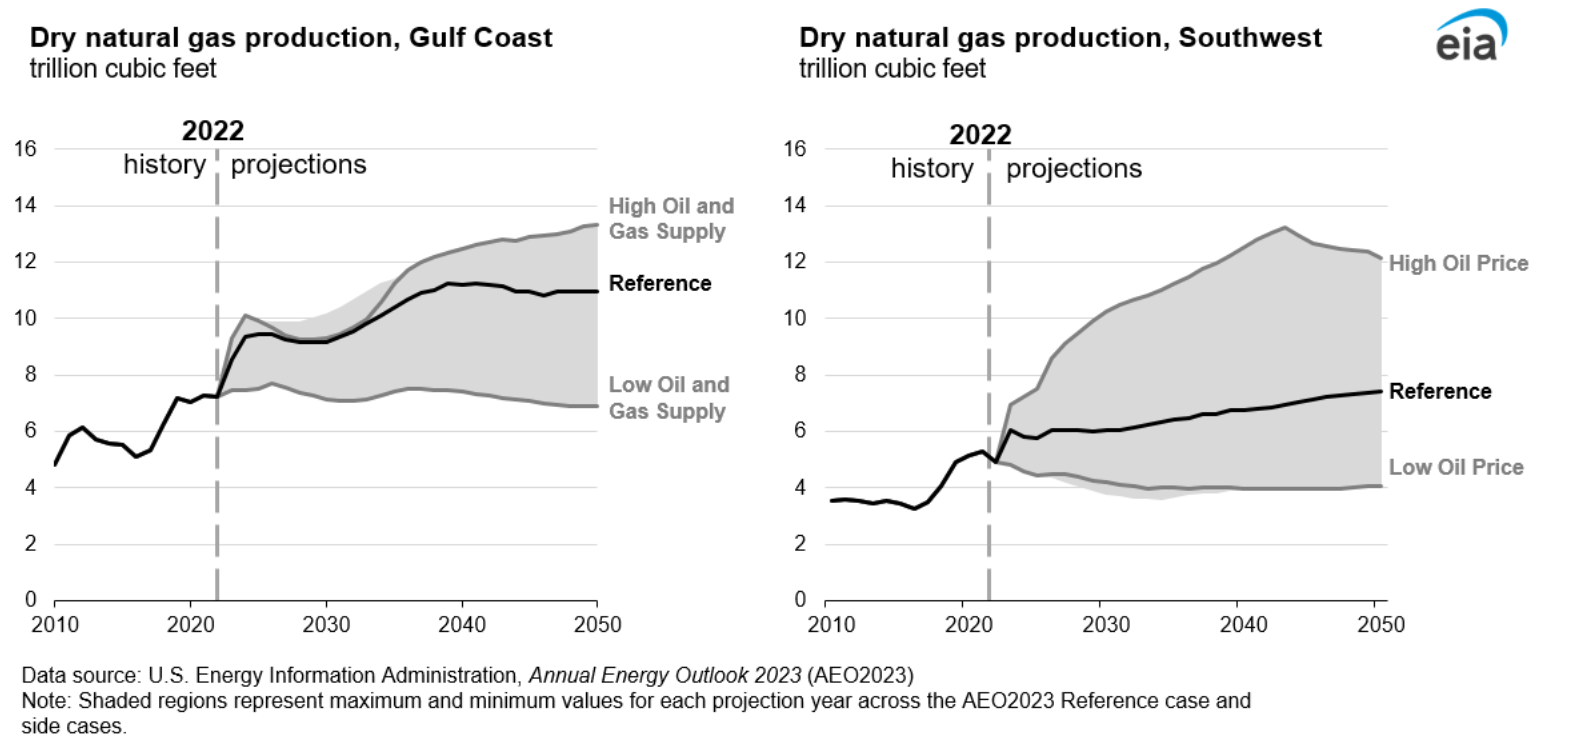 Figure 18. Dry natural gas production, Gulf Coast; Dry natural gas production, Southwest